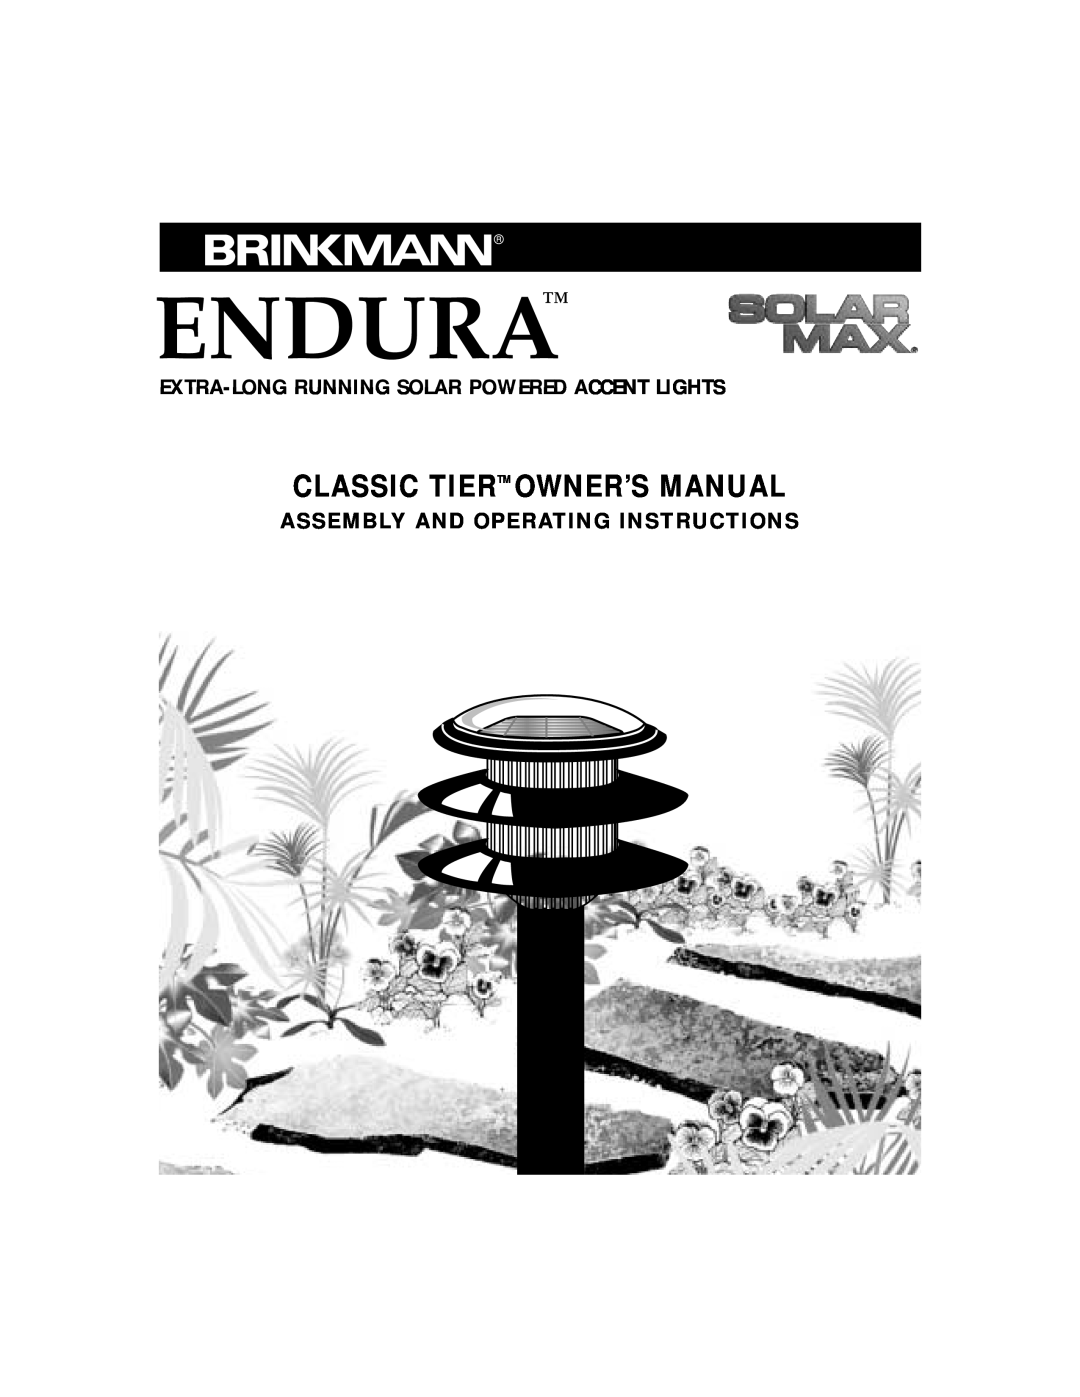 Brinkmann 822-0429-0 owner manual Classic Tiertm Owner’S Manual, Endura, Extra-Long Running Solar Powered Accent Lights 